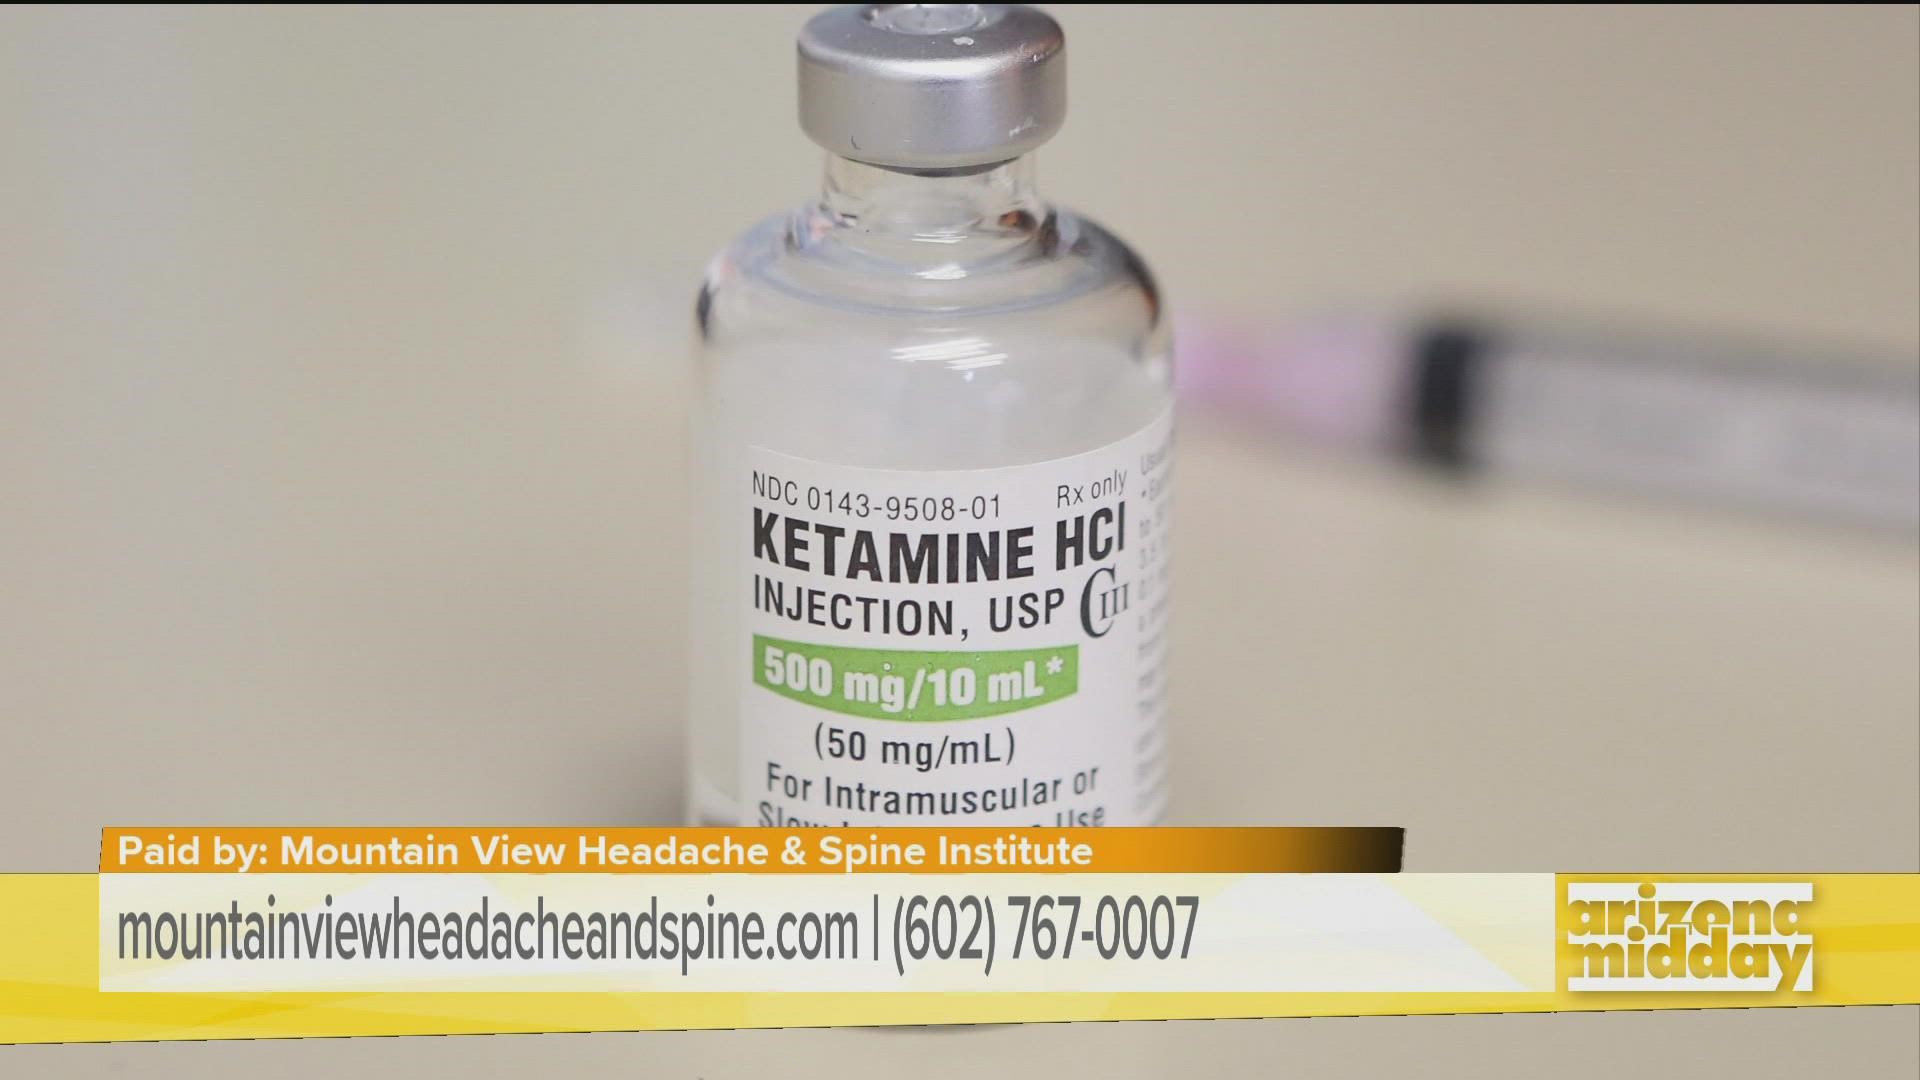 Dr Ruchir Gupta, MD with Mountainview Headache & Spine shares what you need to know about ketamine infusions when using it for pain management.